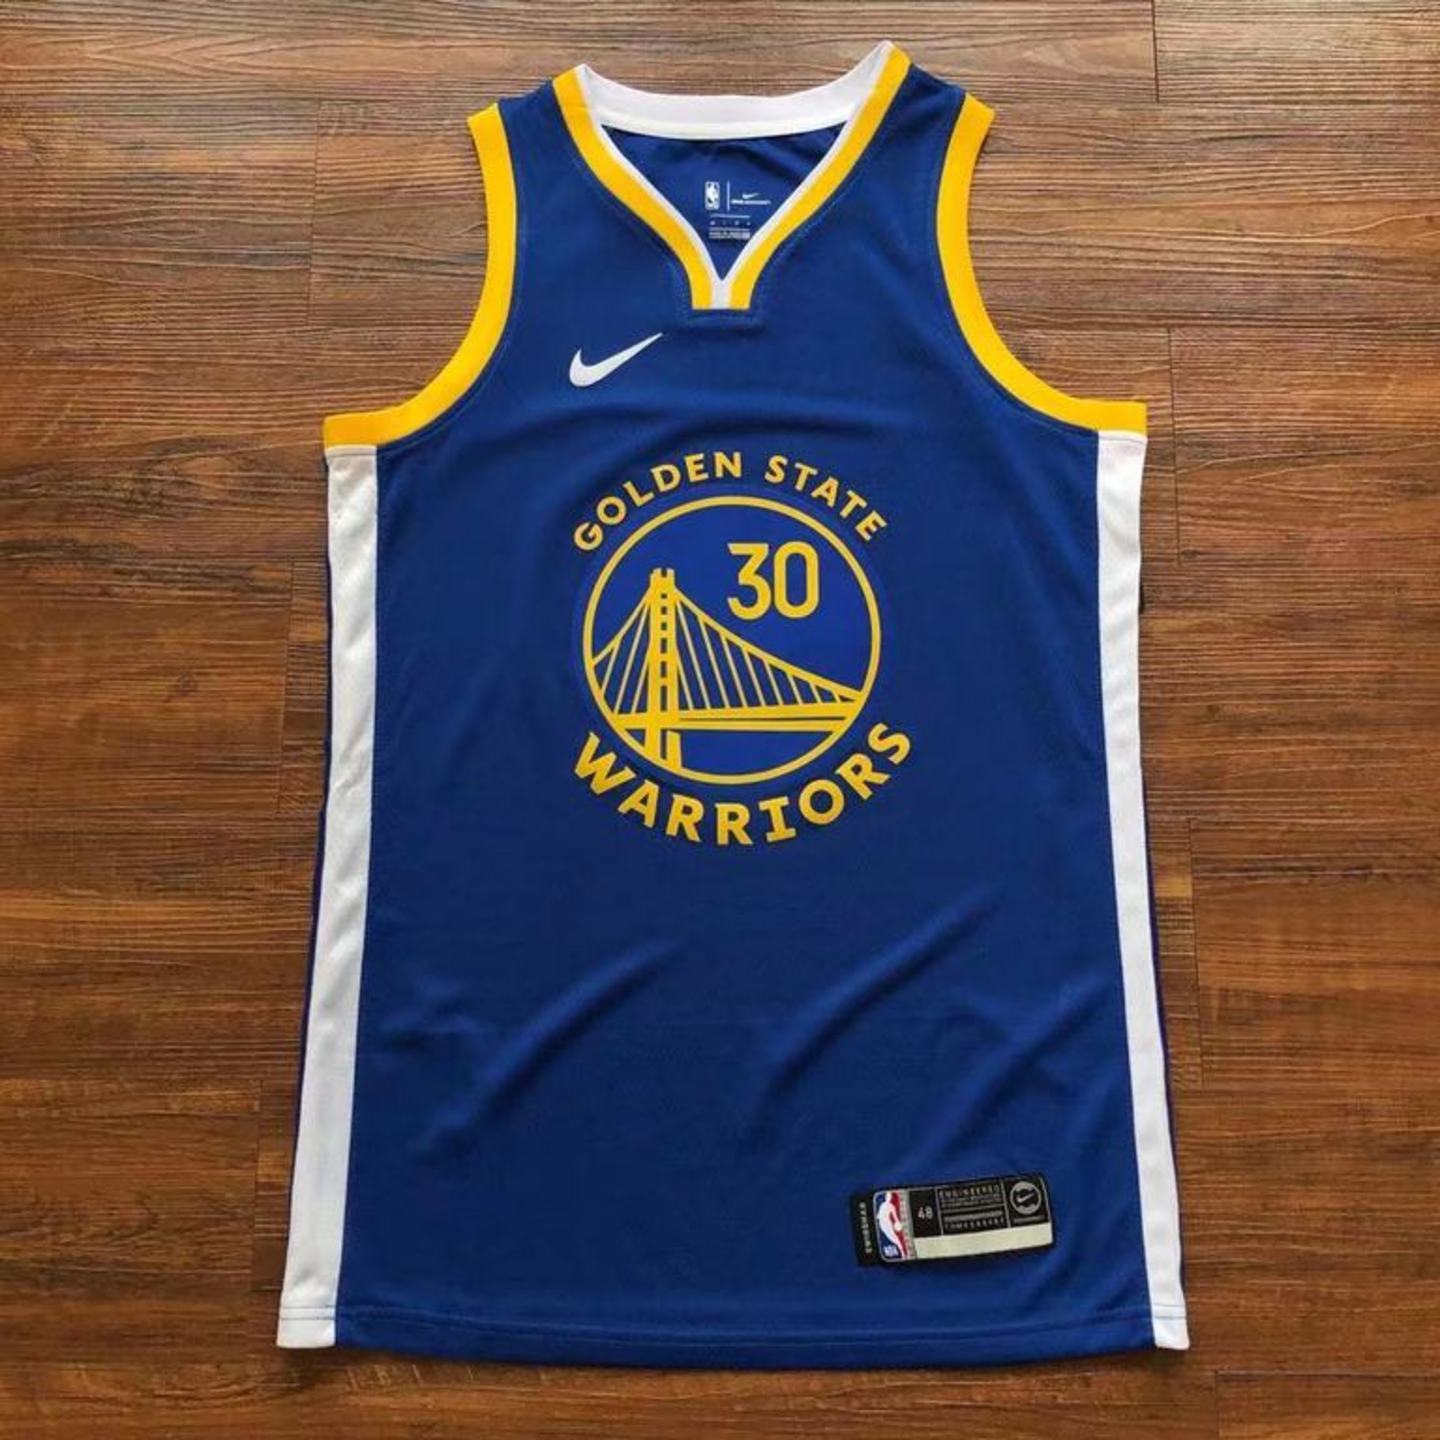  Nike Stephen Curry Warriors Jersey